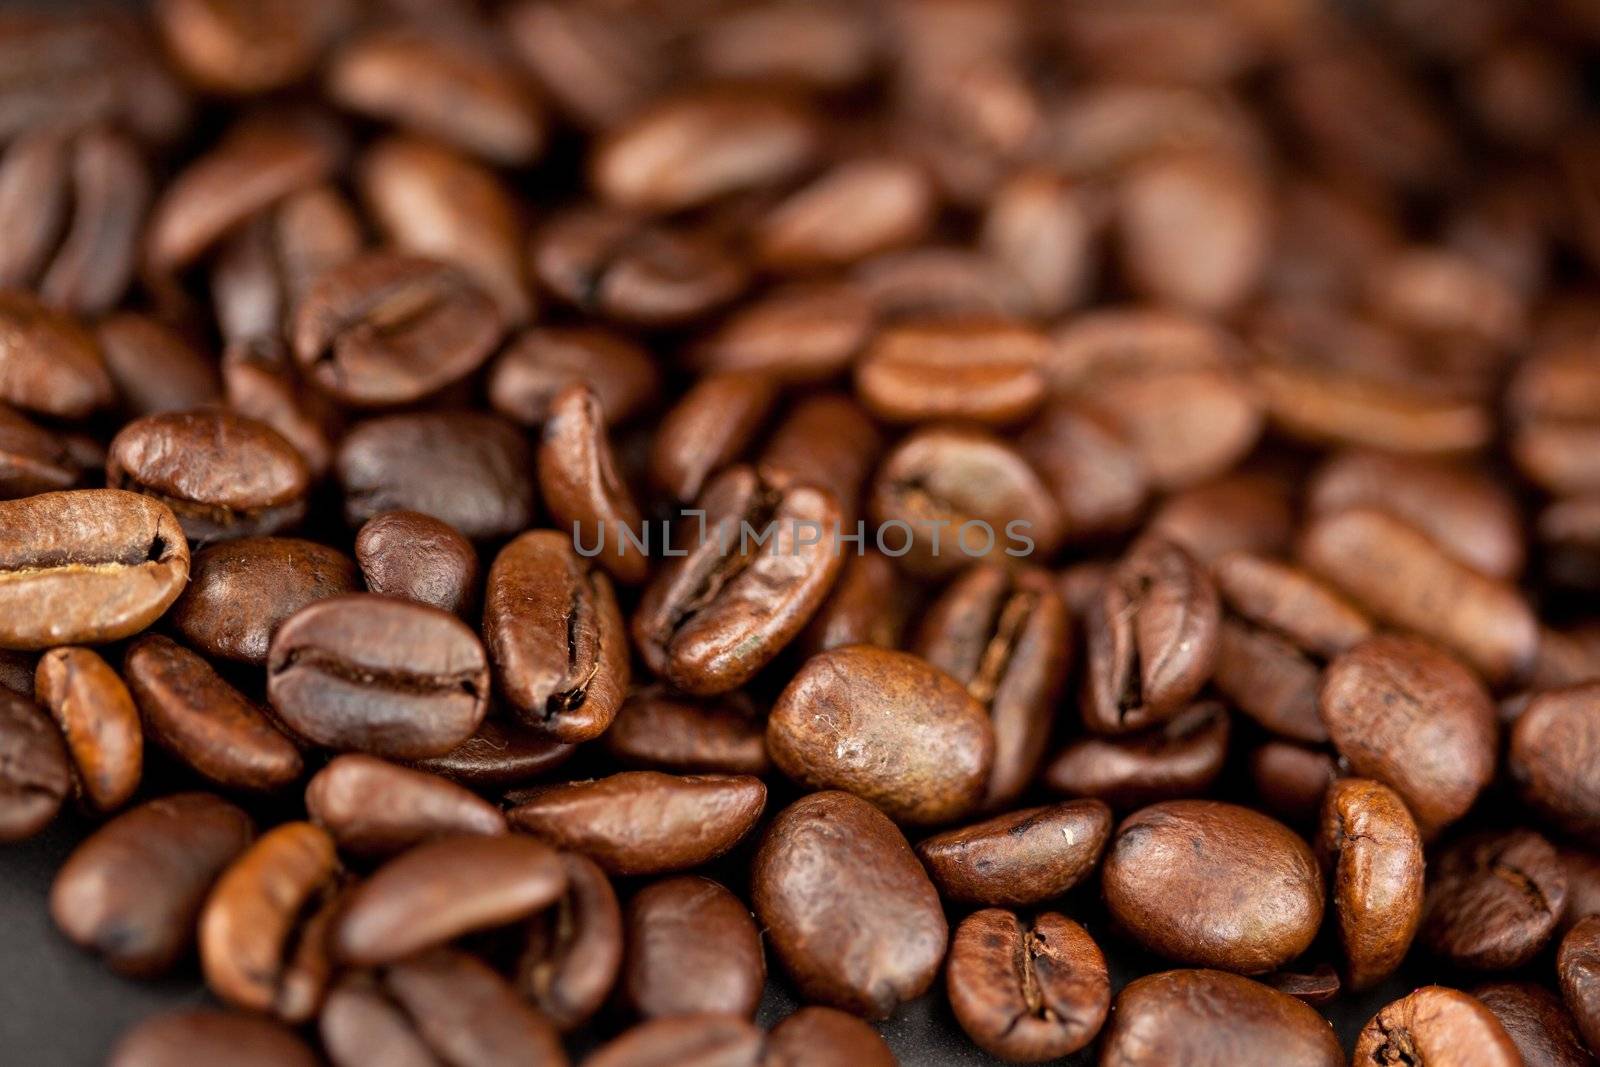 Beans of coffee laid out together by Wavebreakmedia